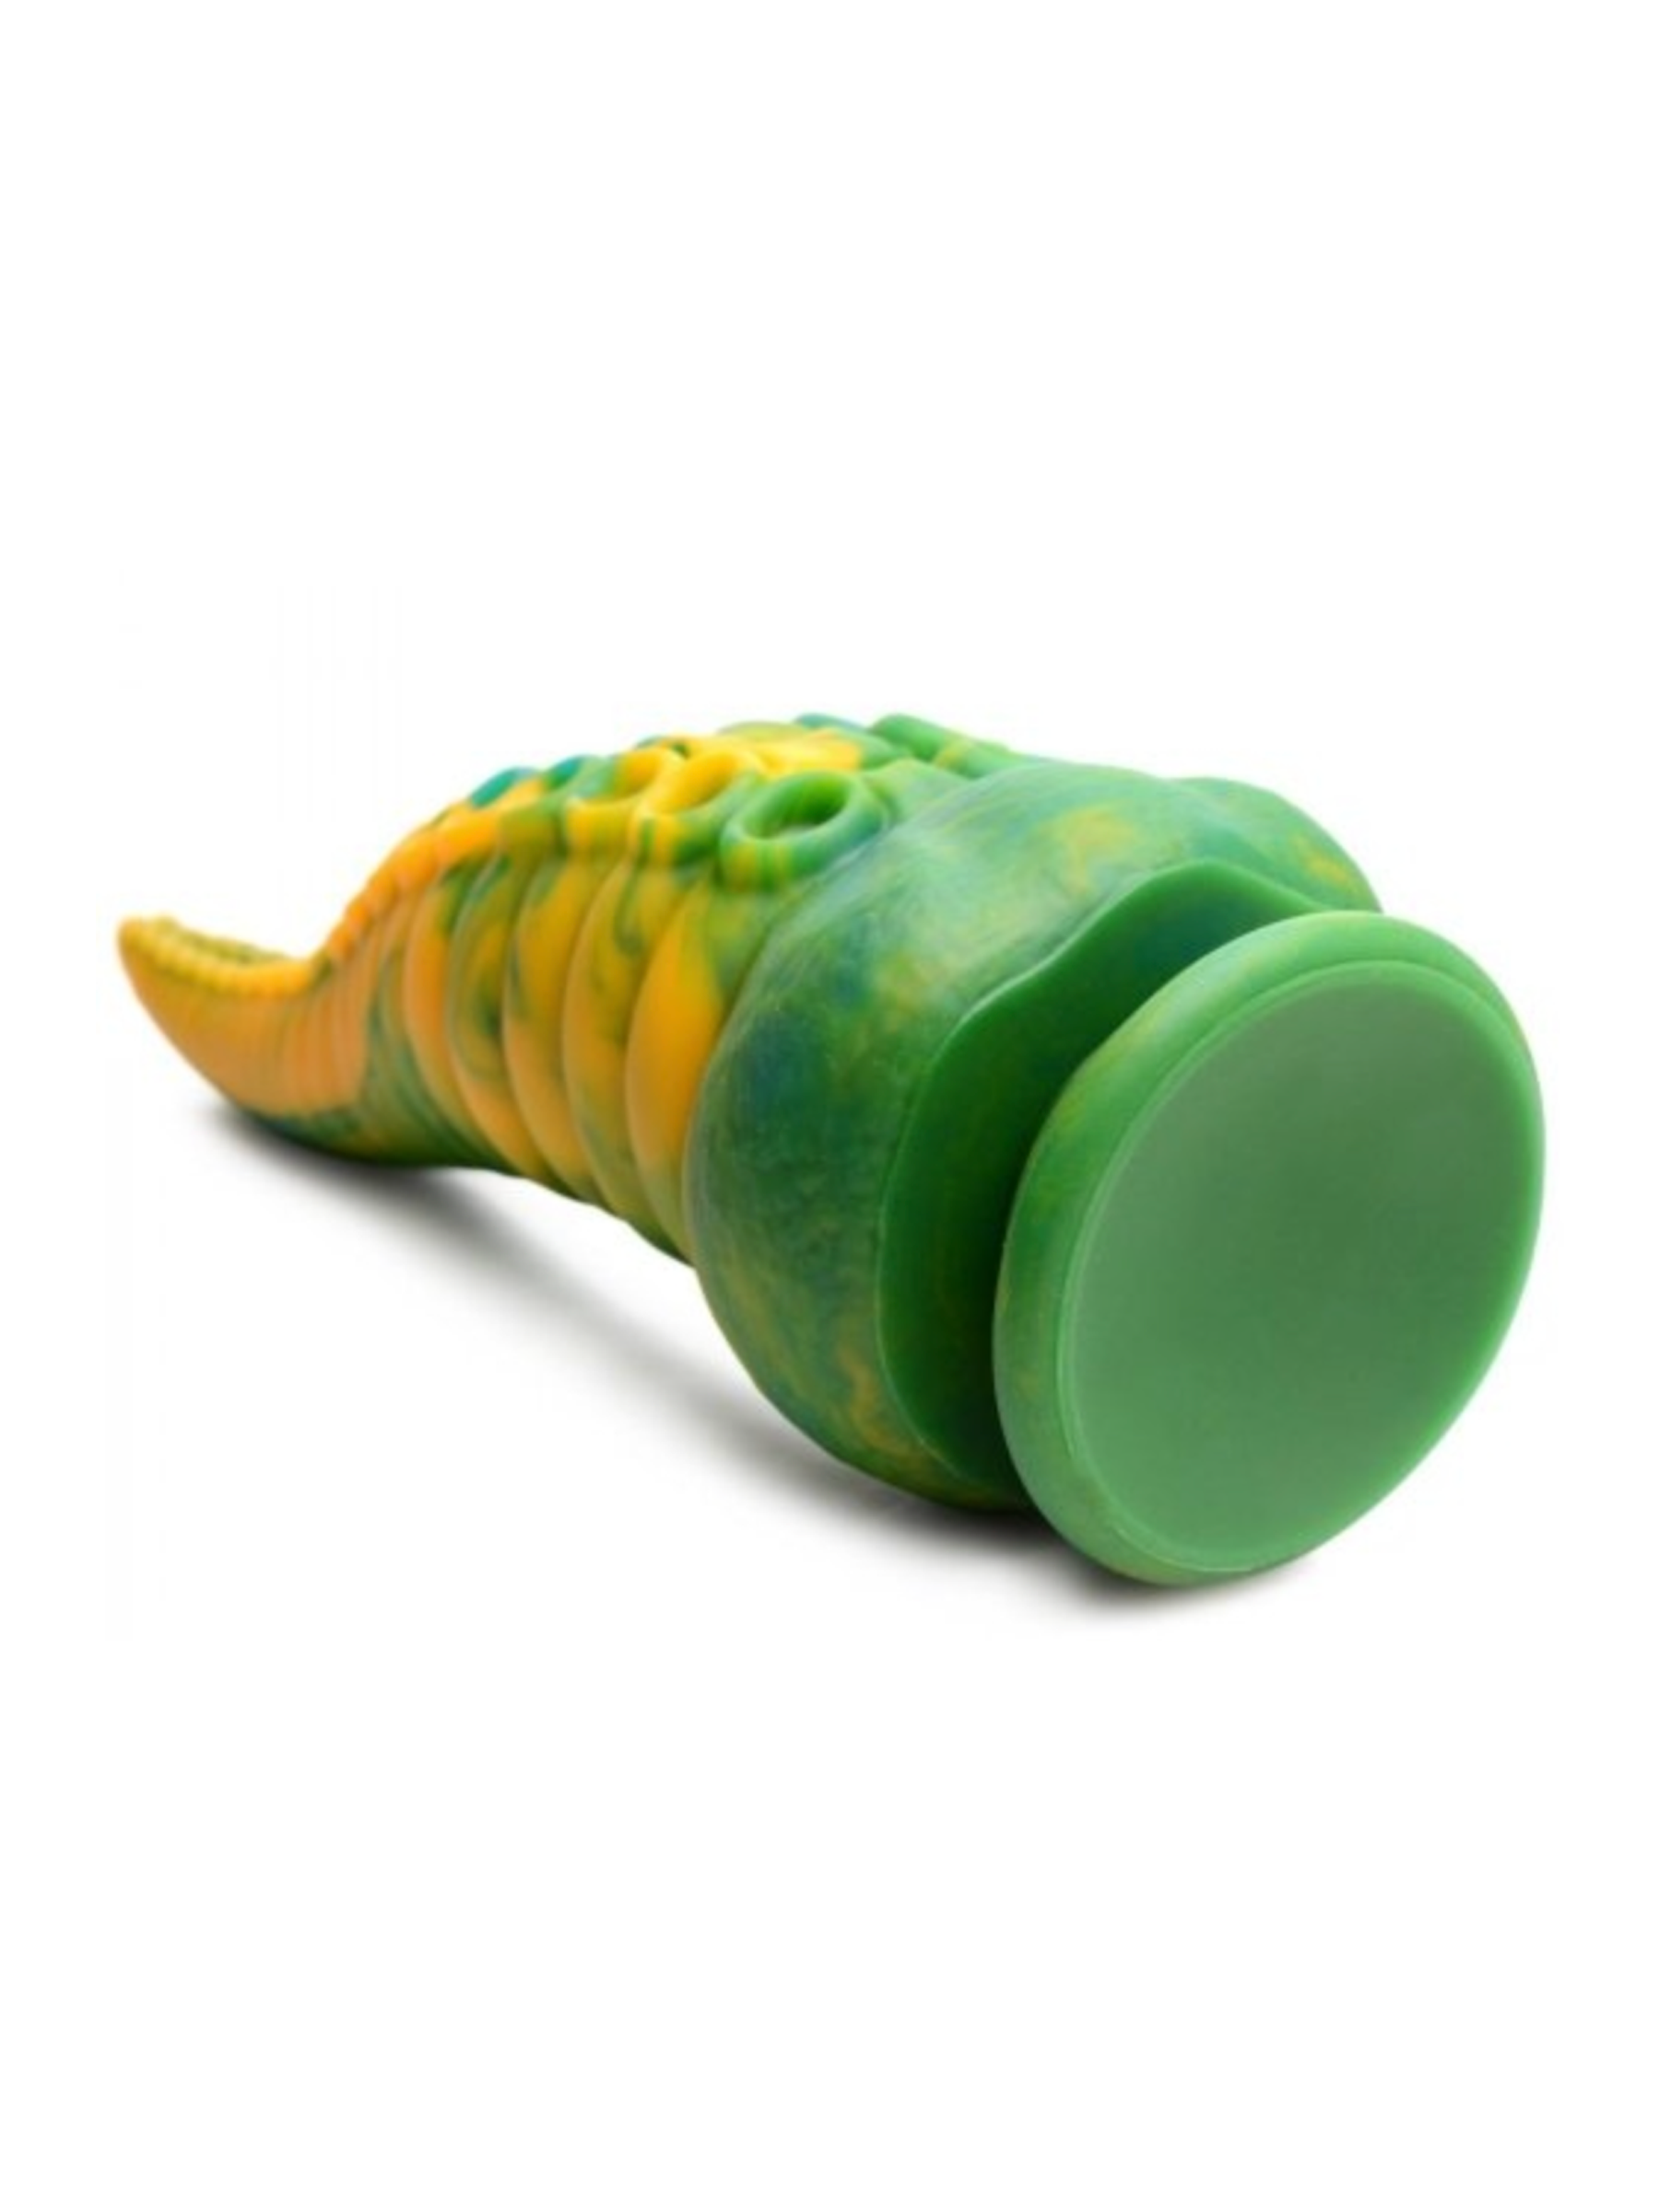 Creature Monstropus Tentacle Suction Cup